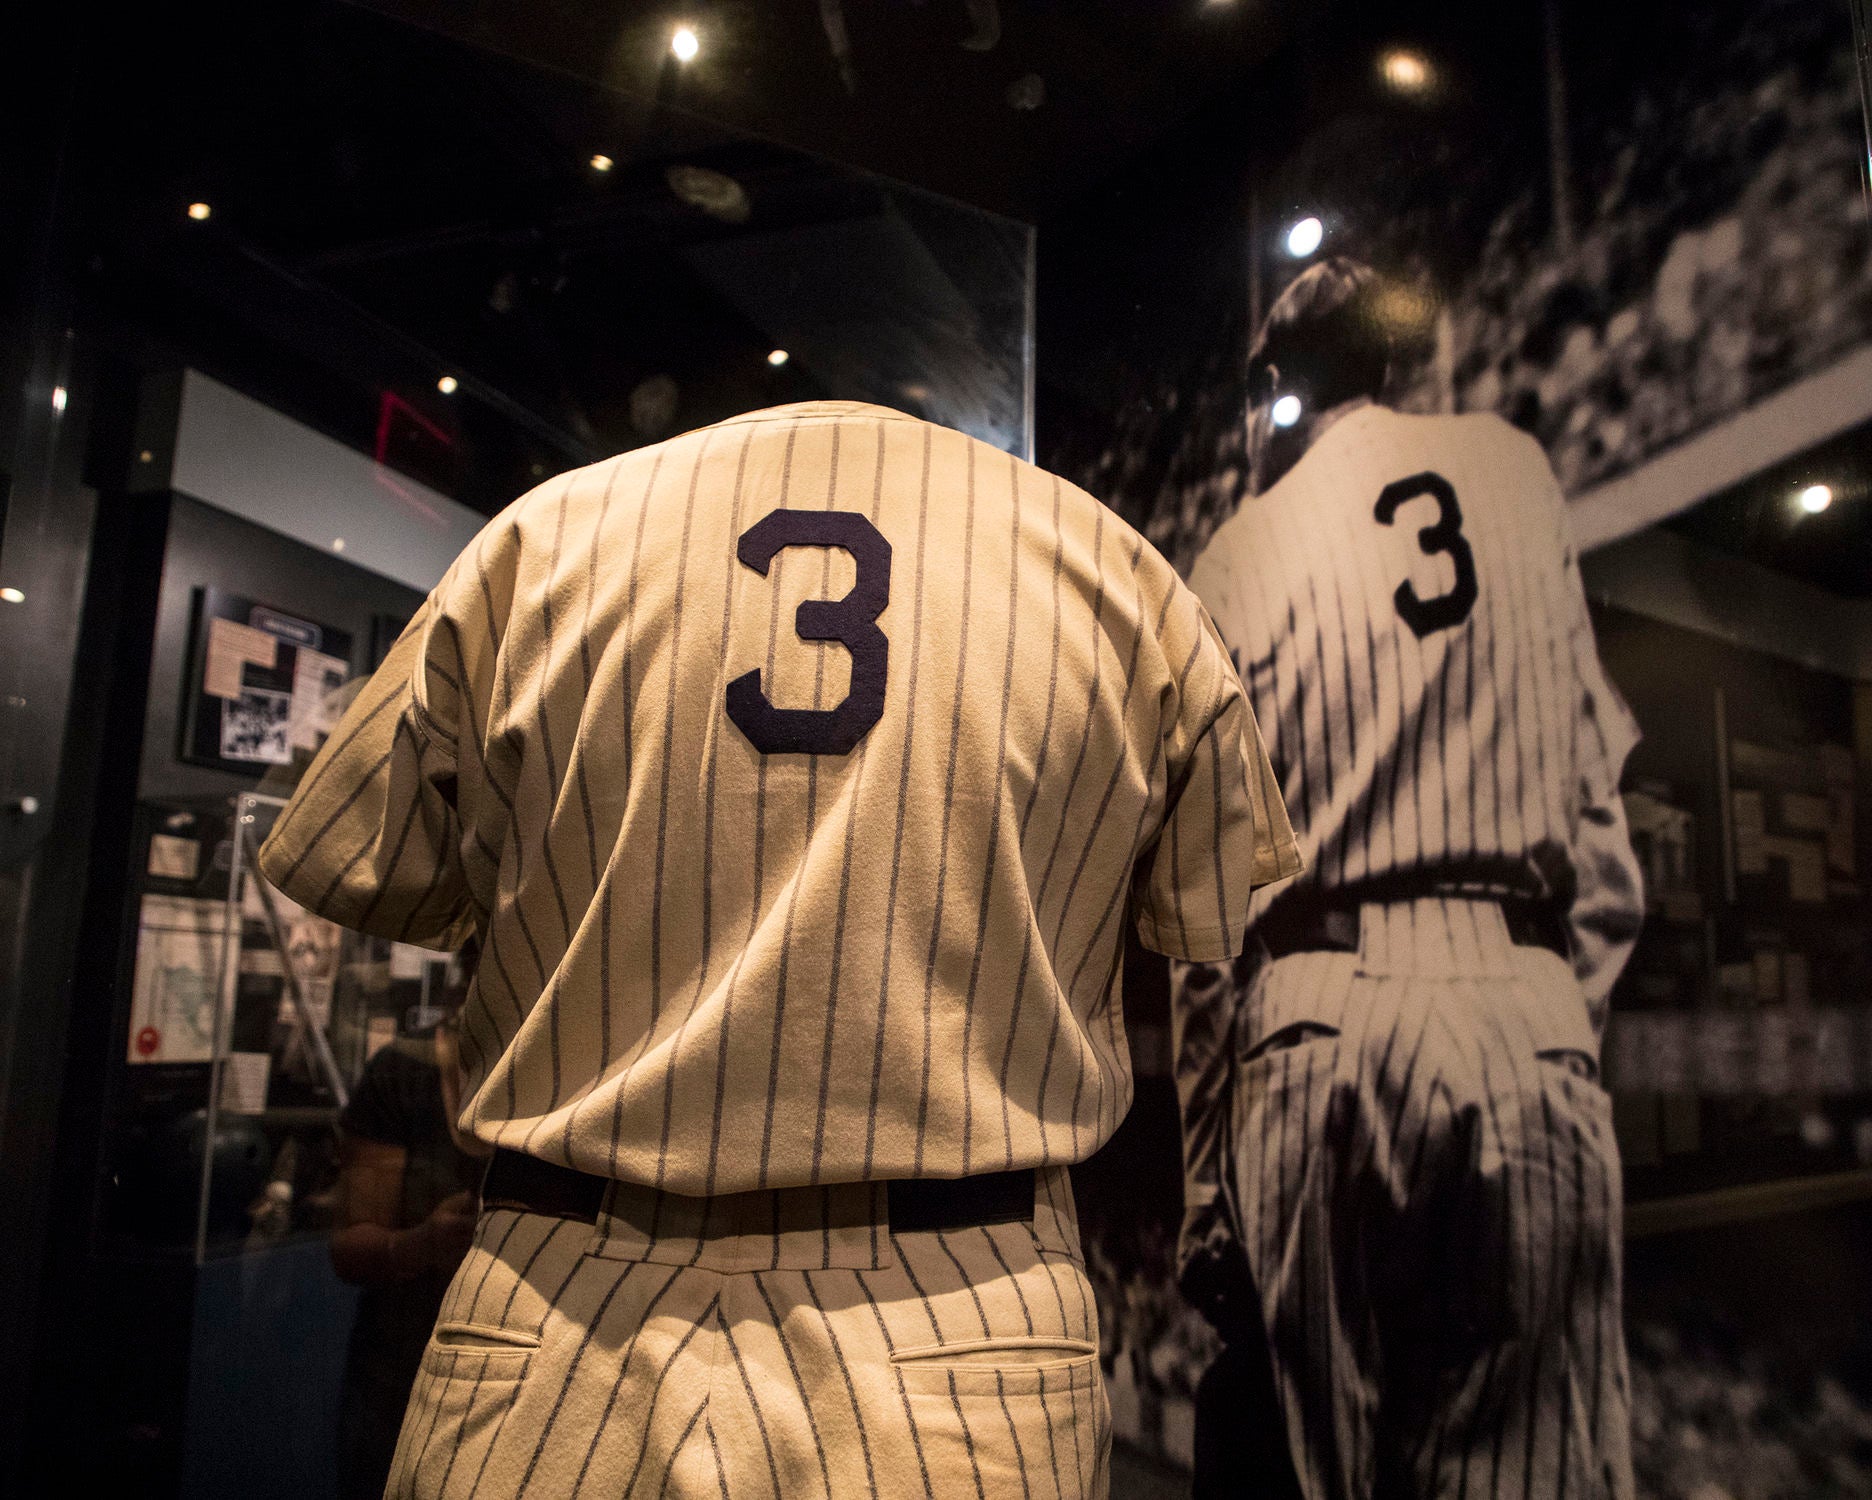 Historic Ruth Jersey A Part Of Hall Of Fame History Baseball Hall Of Fame